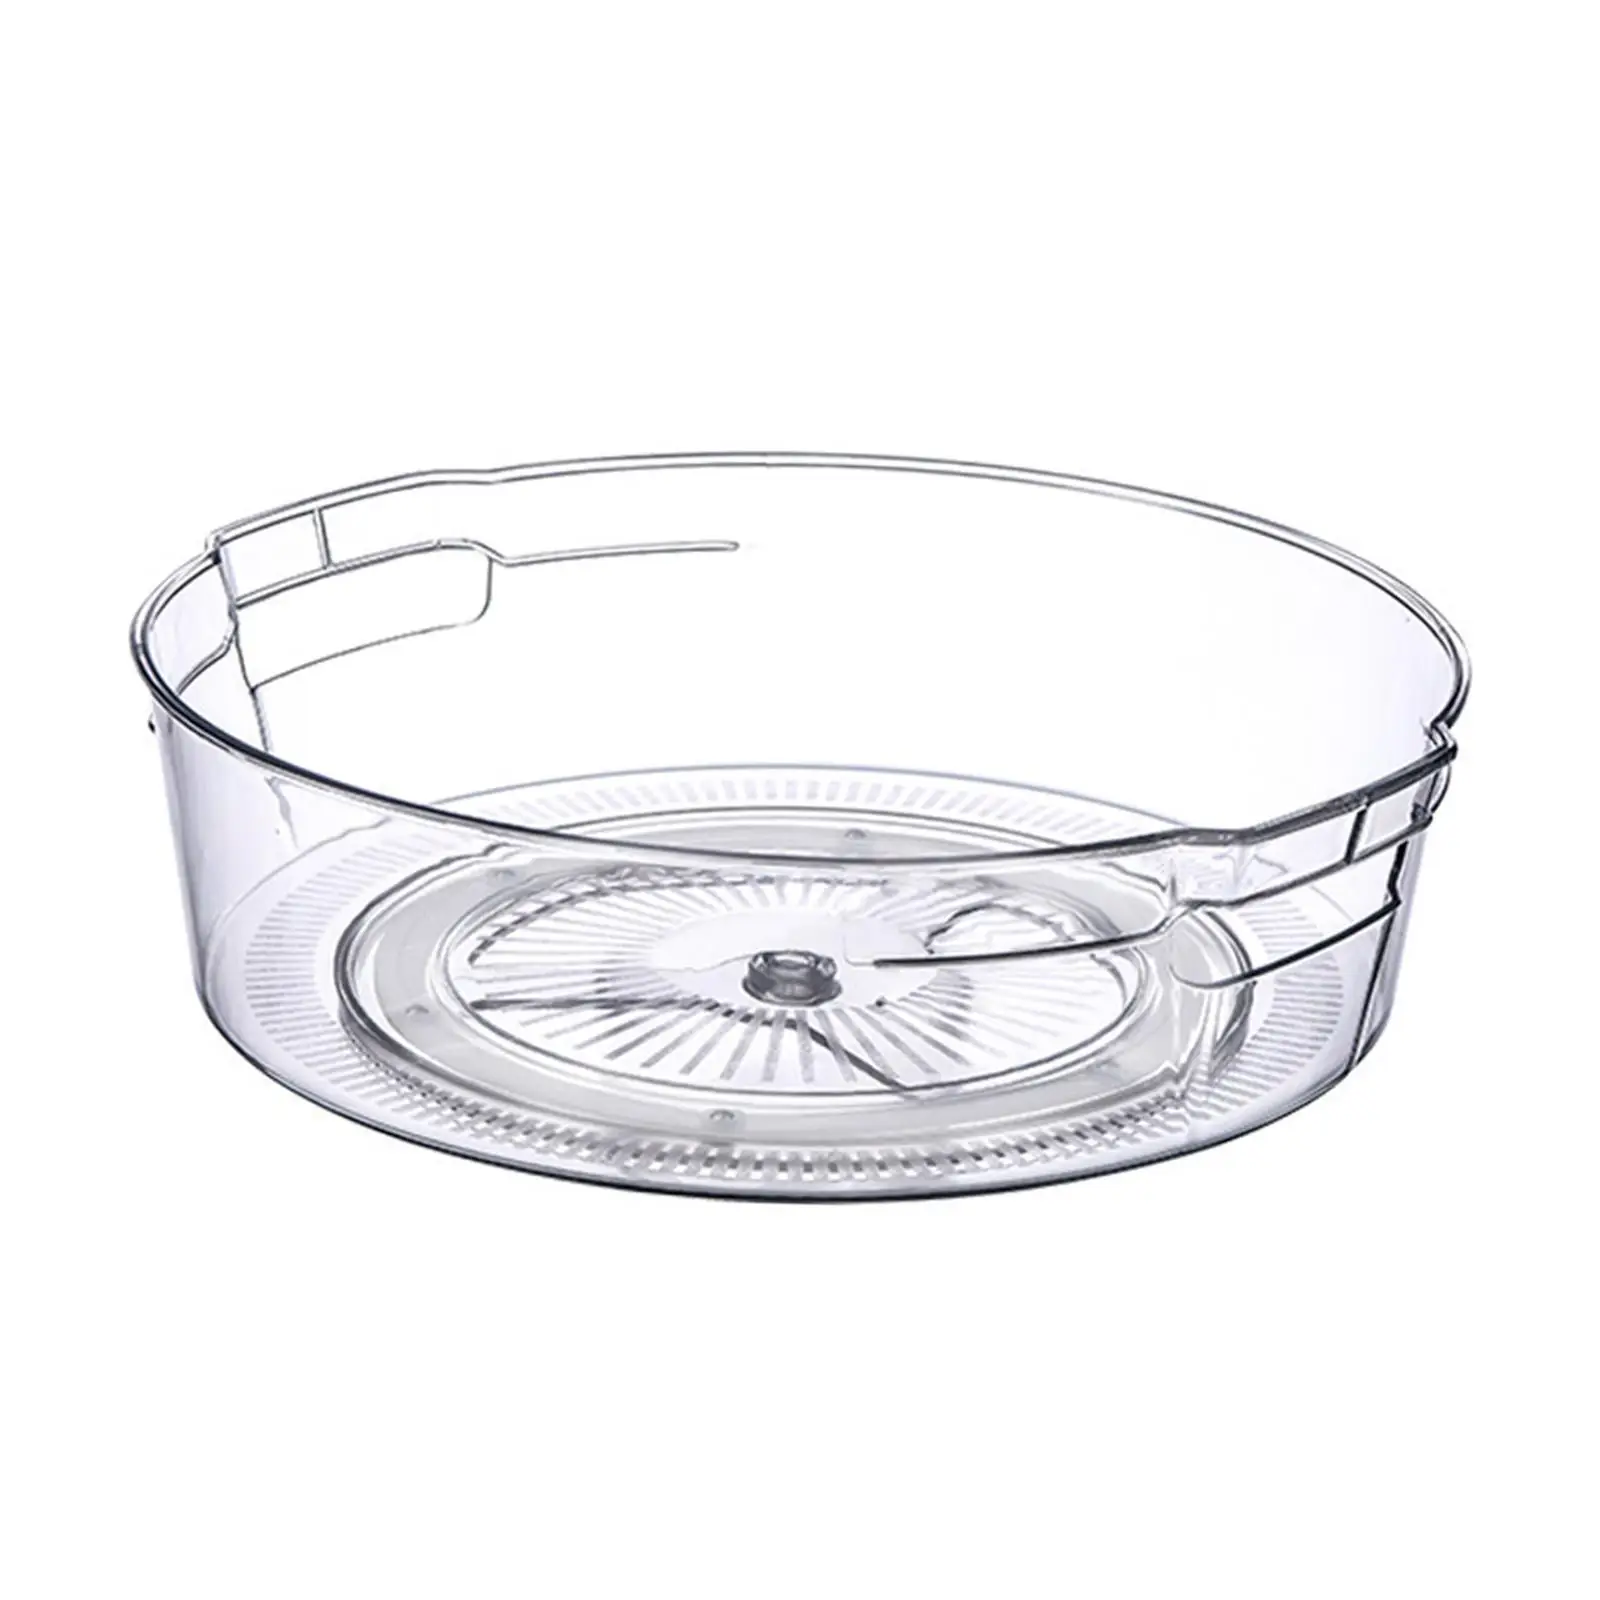 Organizer for Kitchen Display Rack Turntable Food Storage Container Rotating Condiments Spice Rack for Baking Kitchen